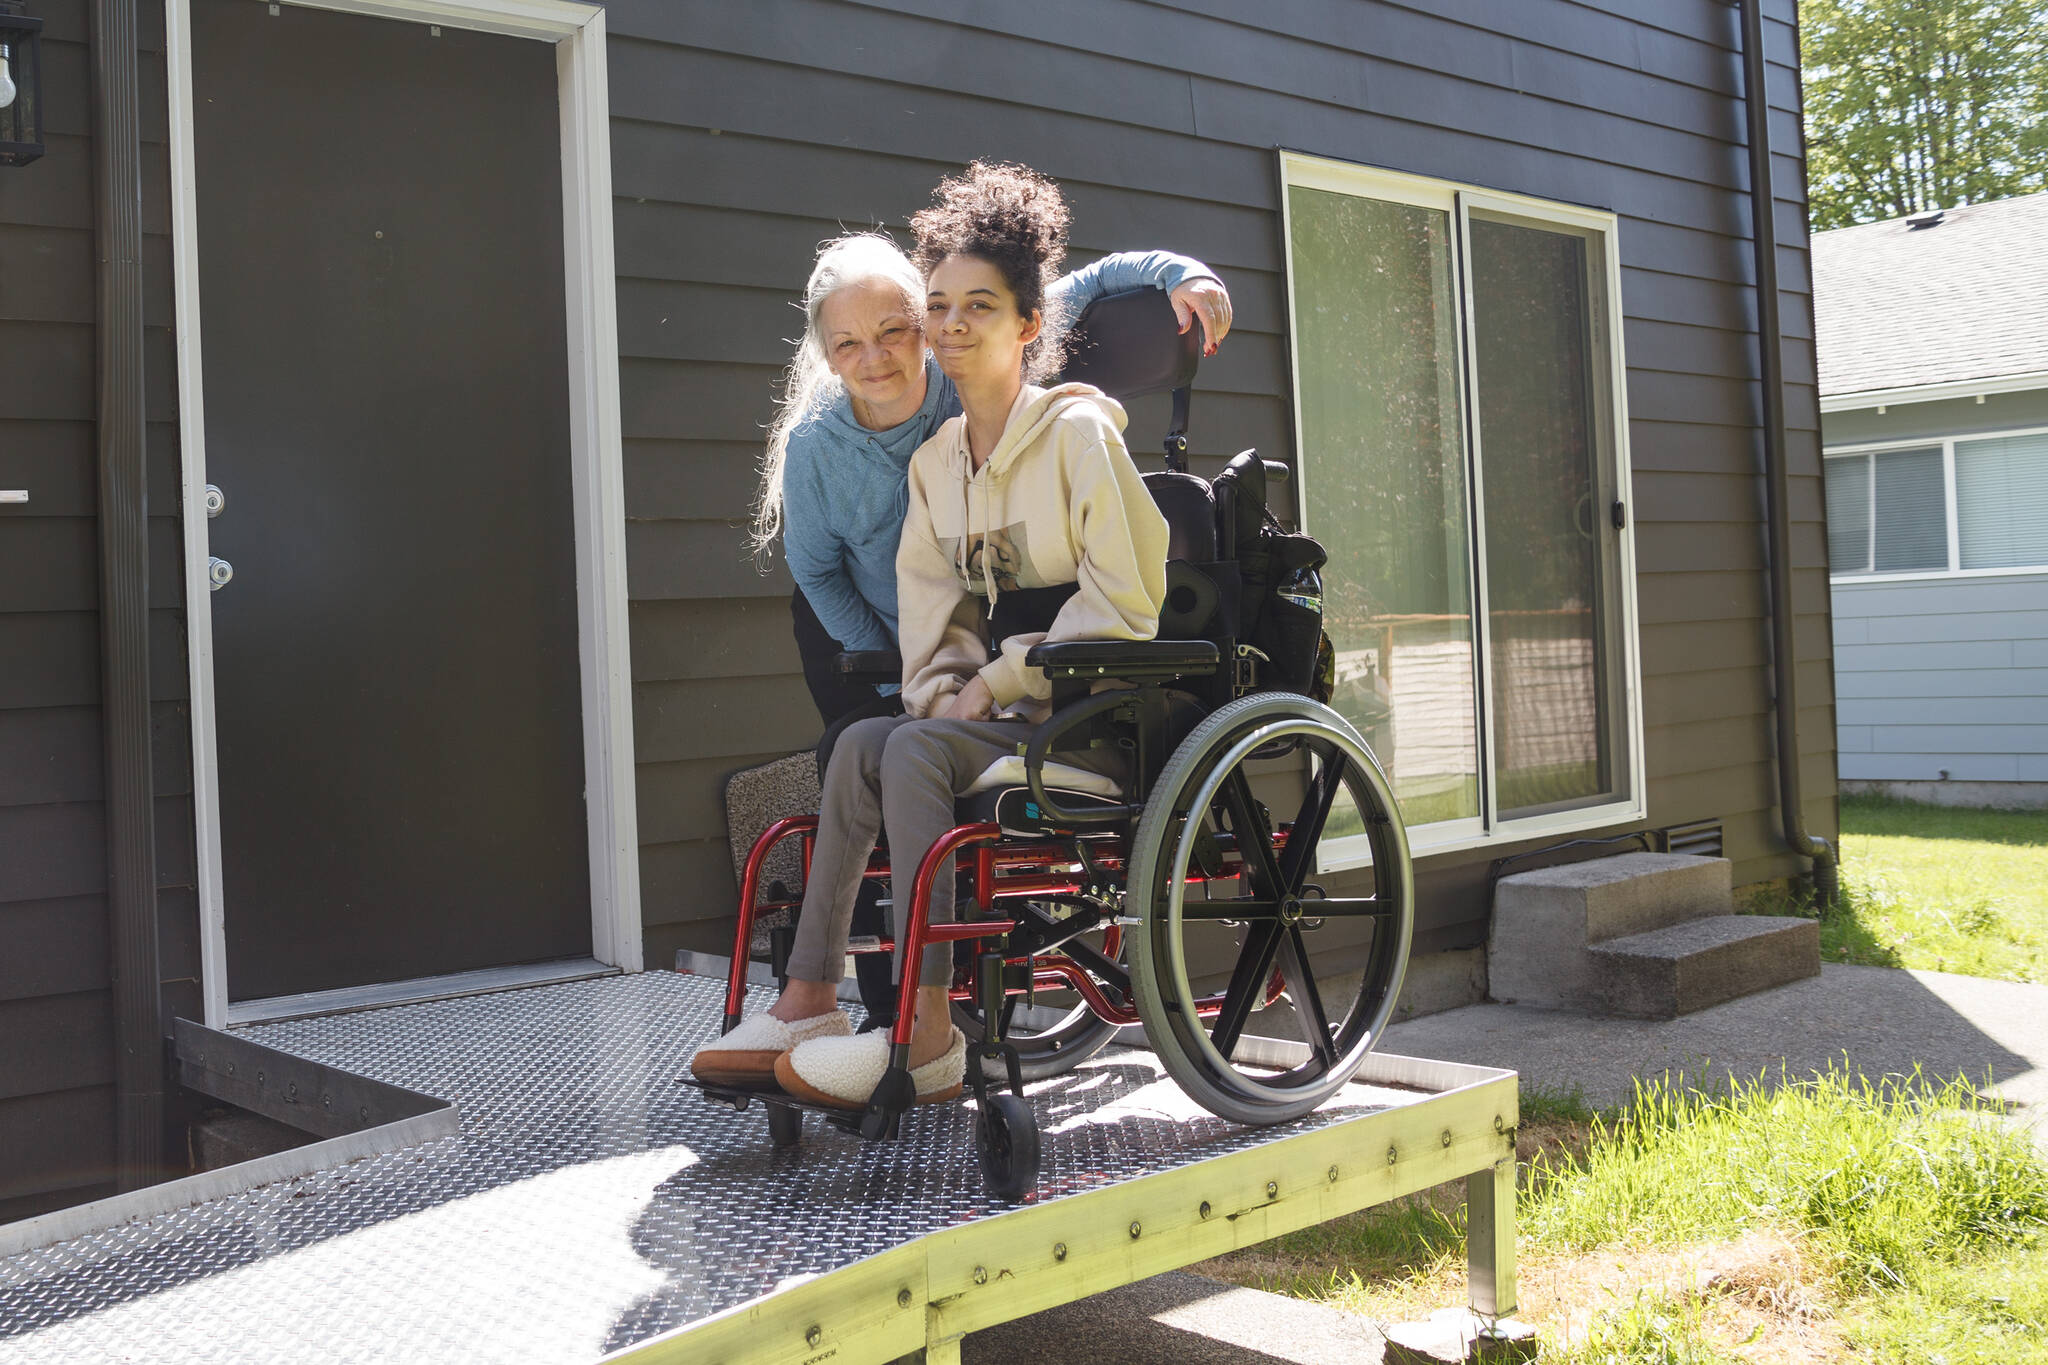 Photo by Henry Stewart-Wood/Sound Publishing
Linda Short and her daughter, Morgan Short, pose for a photo on the wheelchair ramp that was built after an Auburn school bus driver noticed Morgan needed a ramp.